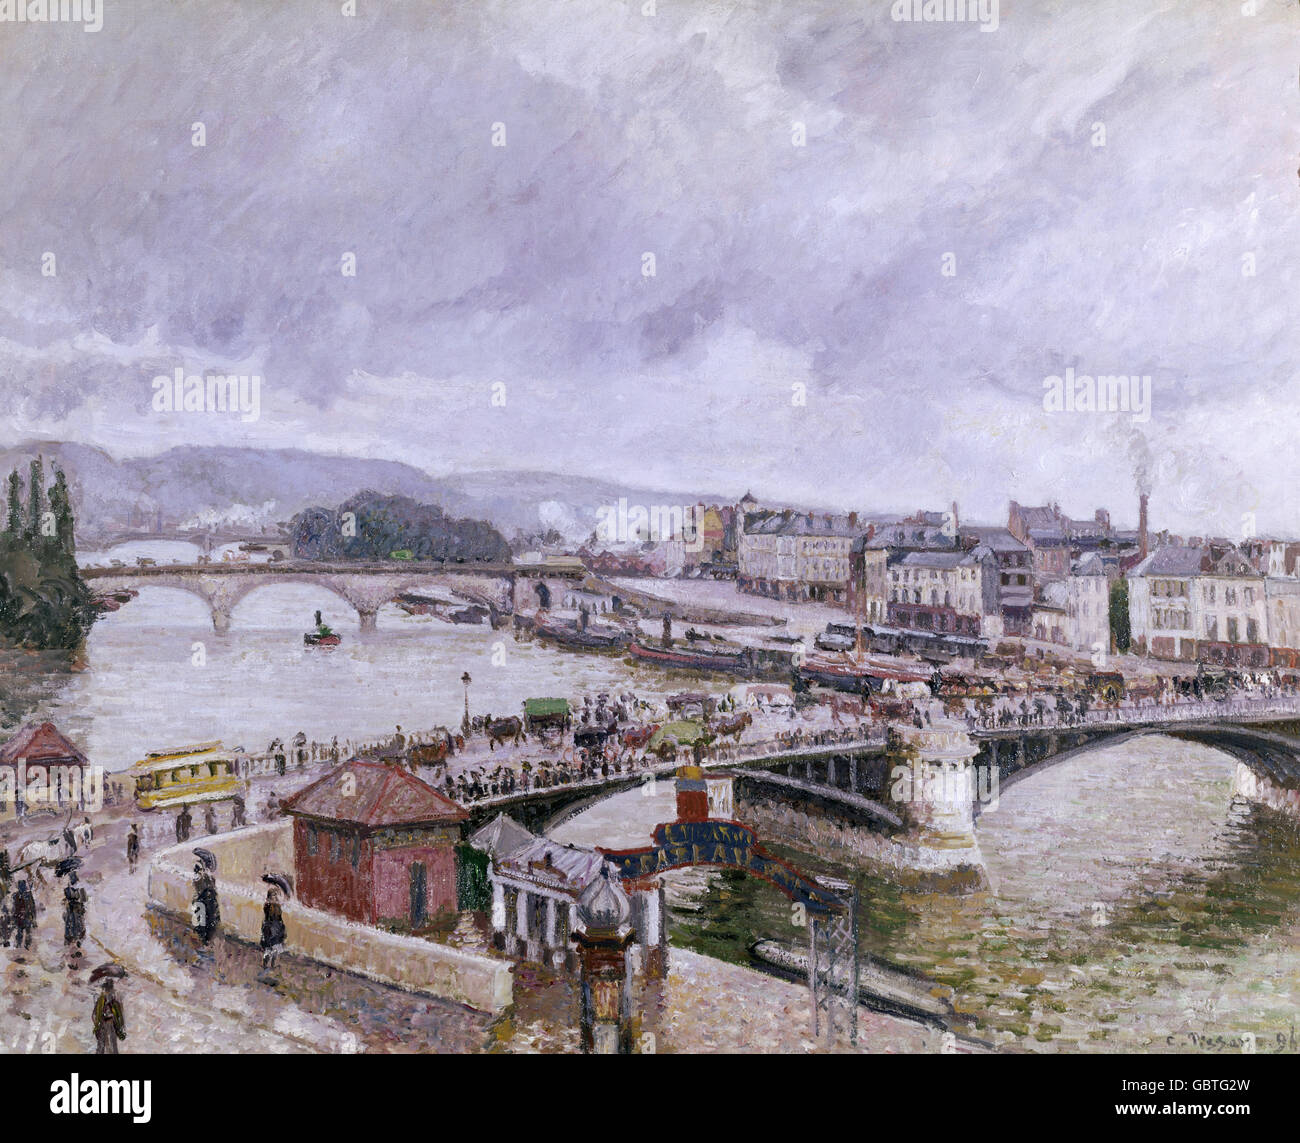 fine arts, Pissarro, Camille (1830 - 1903), painting, "View of the Great Bridge at Rouen", oil on canvas, 1894, Staatliche Kunsthalle, Karlsruhe, Stock Photo